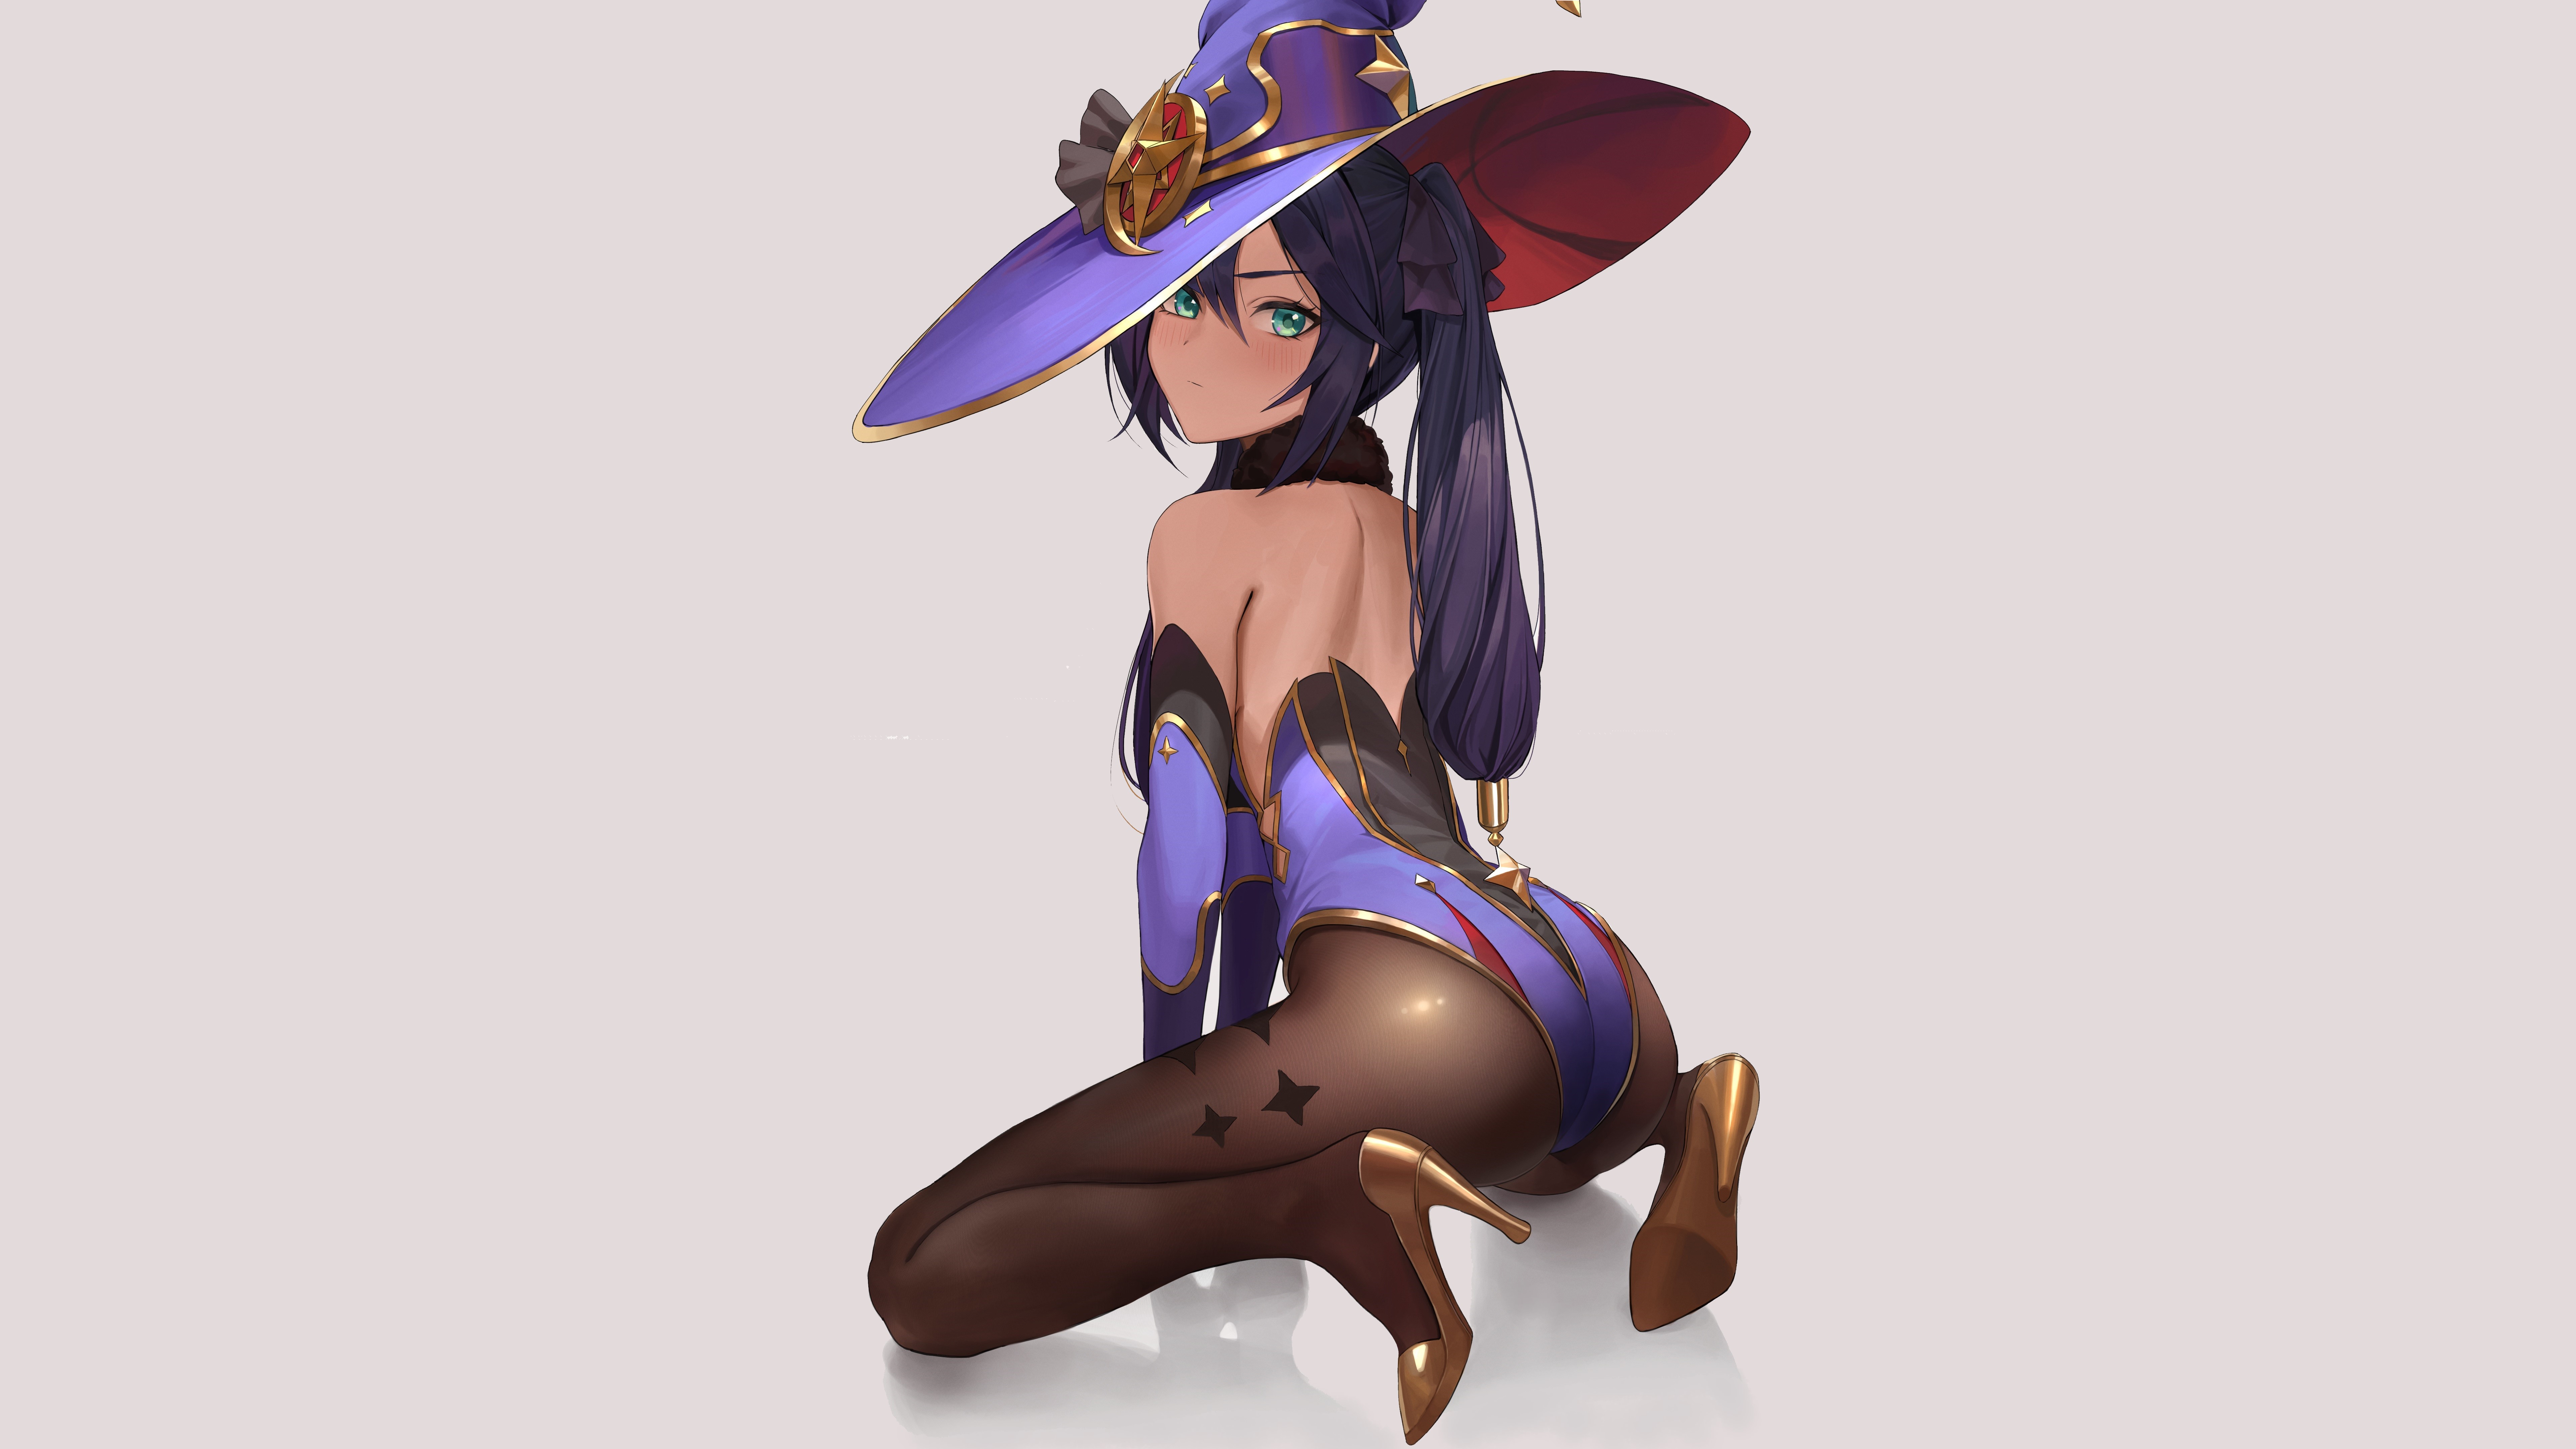 Anime 7684x4322 Genshin Impact Mona (Genshin Impact) anime anime girls video game girls simple background looking at viewer witch witch hat bareback long hair purple hair leotard bodysuit stockings high heels arched back ass thighs gloves